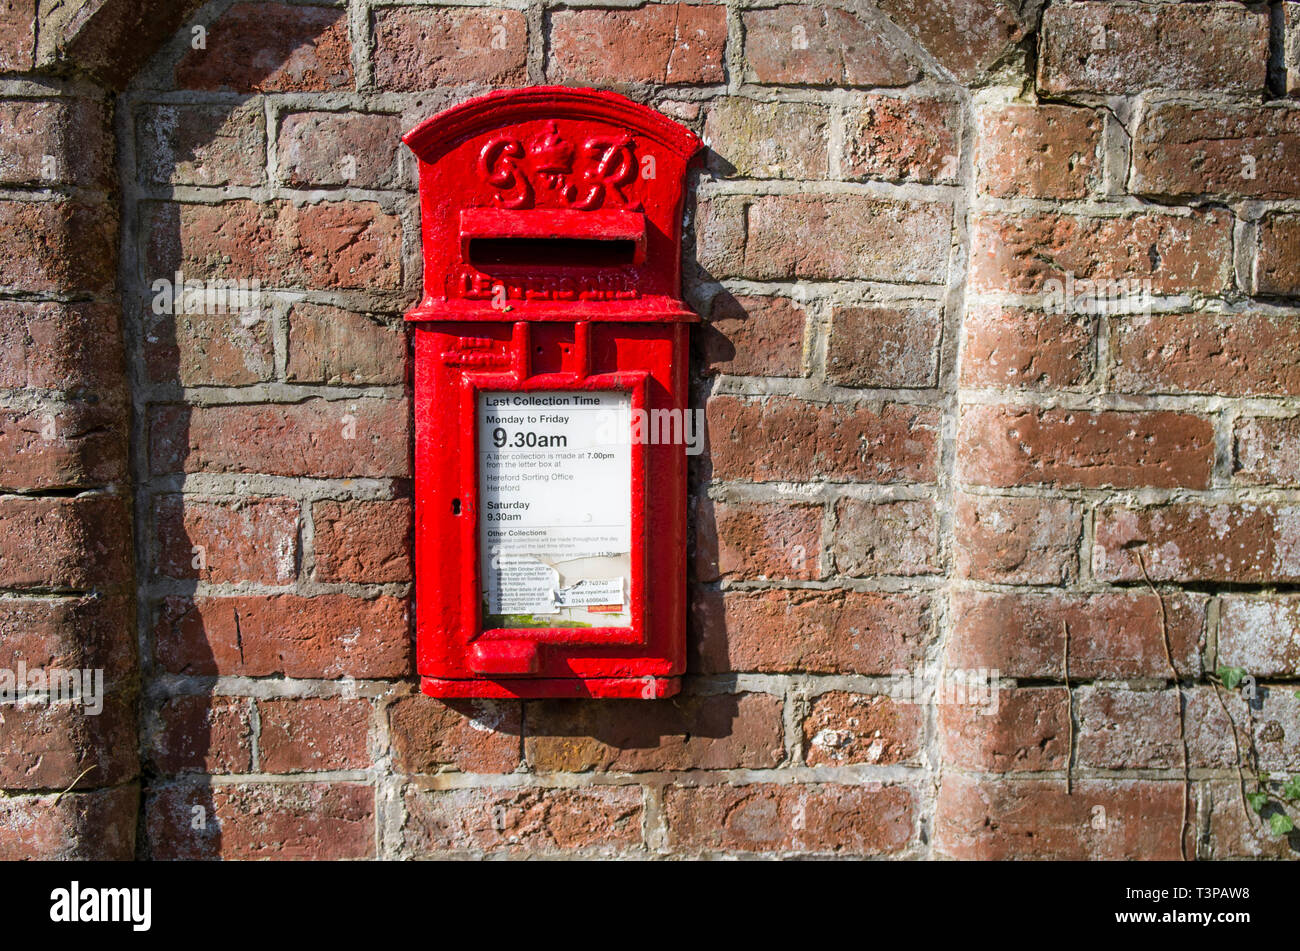 Royal Mail post box from the era of King George VI, in rural England Stock Photo